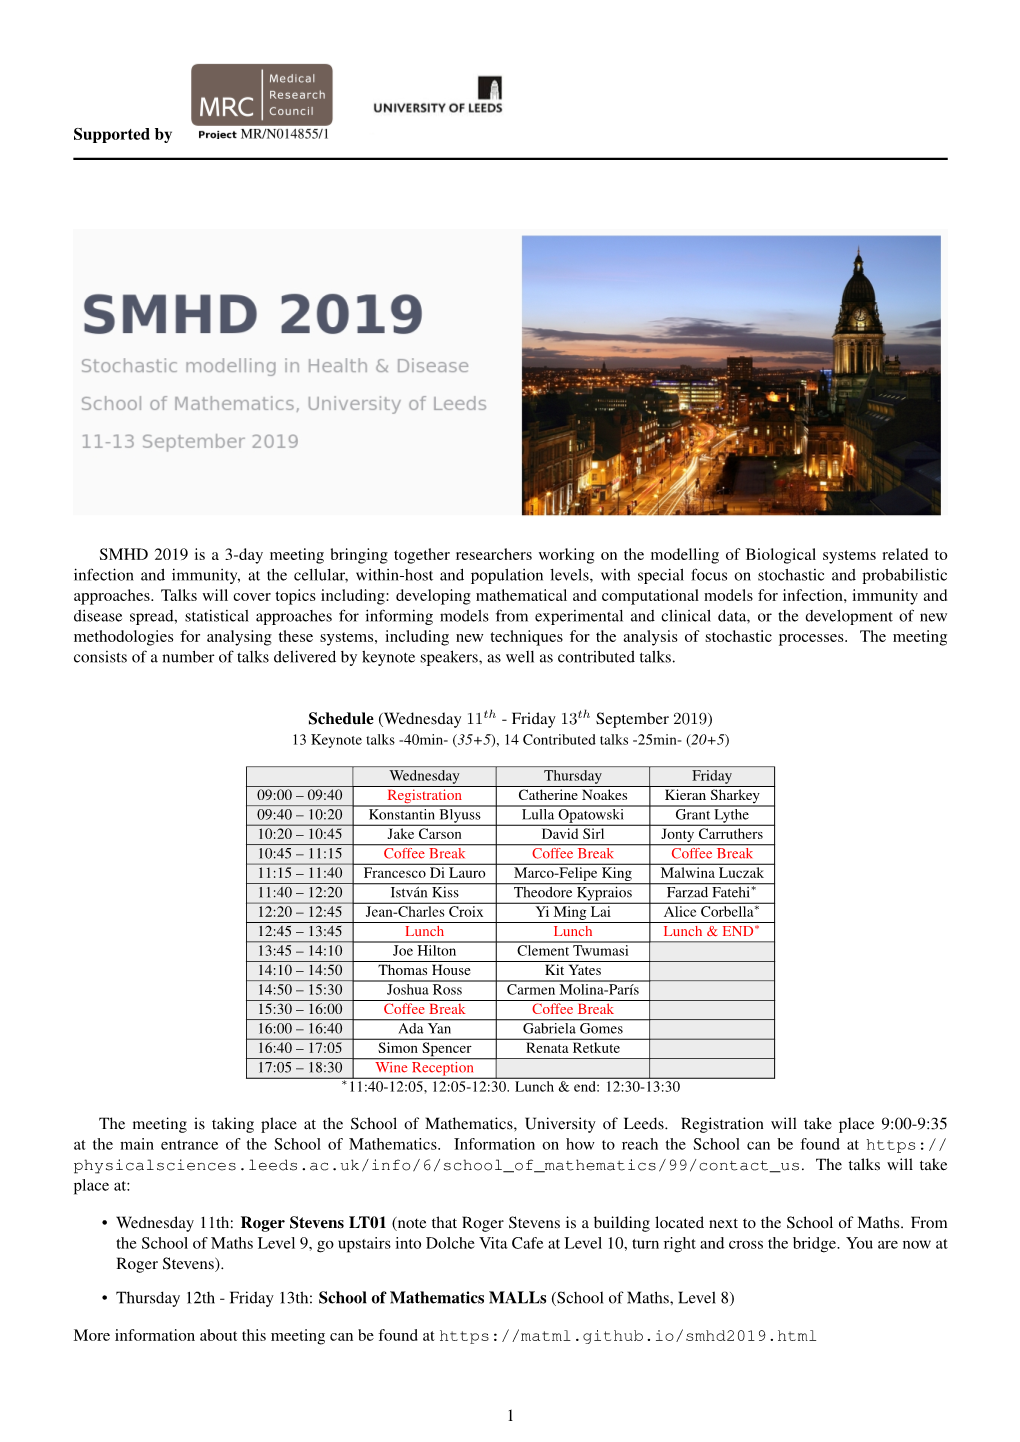 Supported by SMHD 2019 Is a 3-Day Meeting Bringing Together